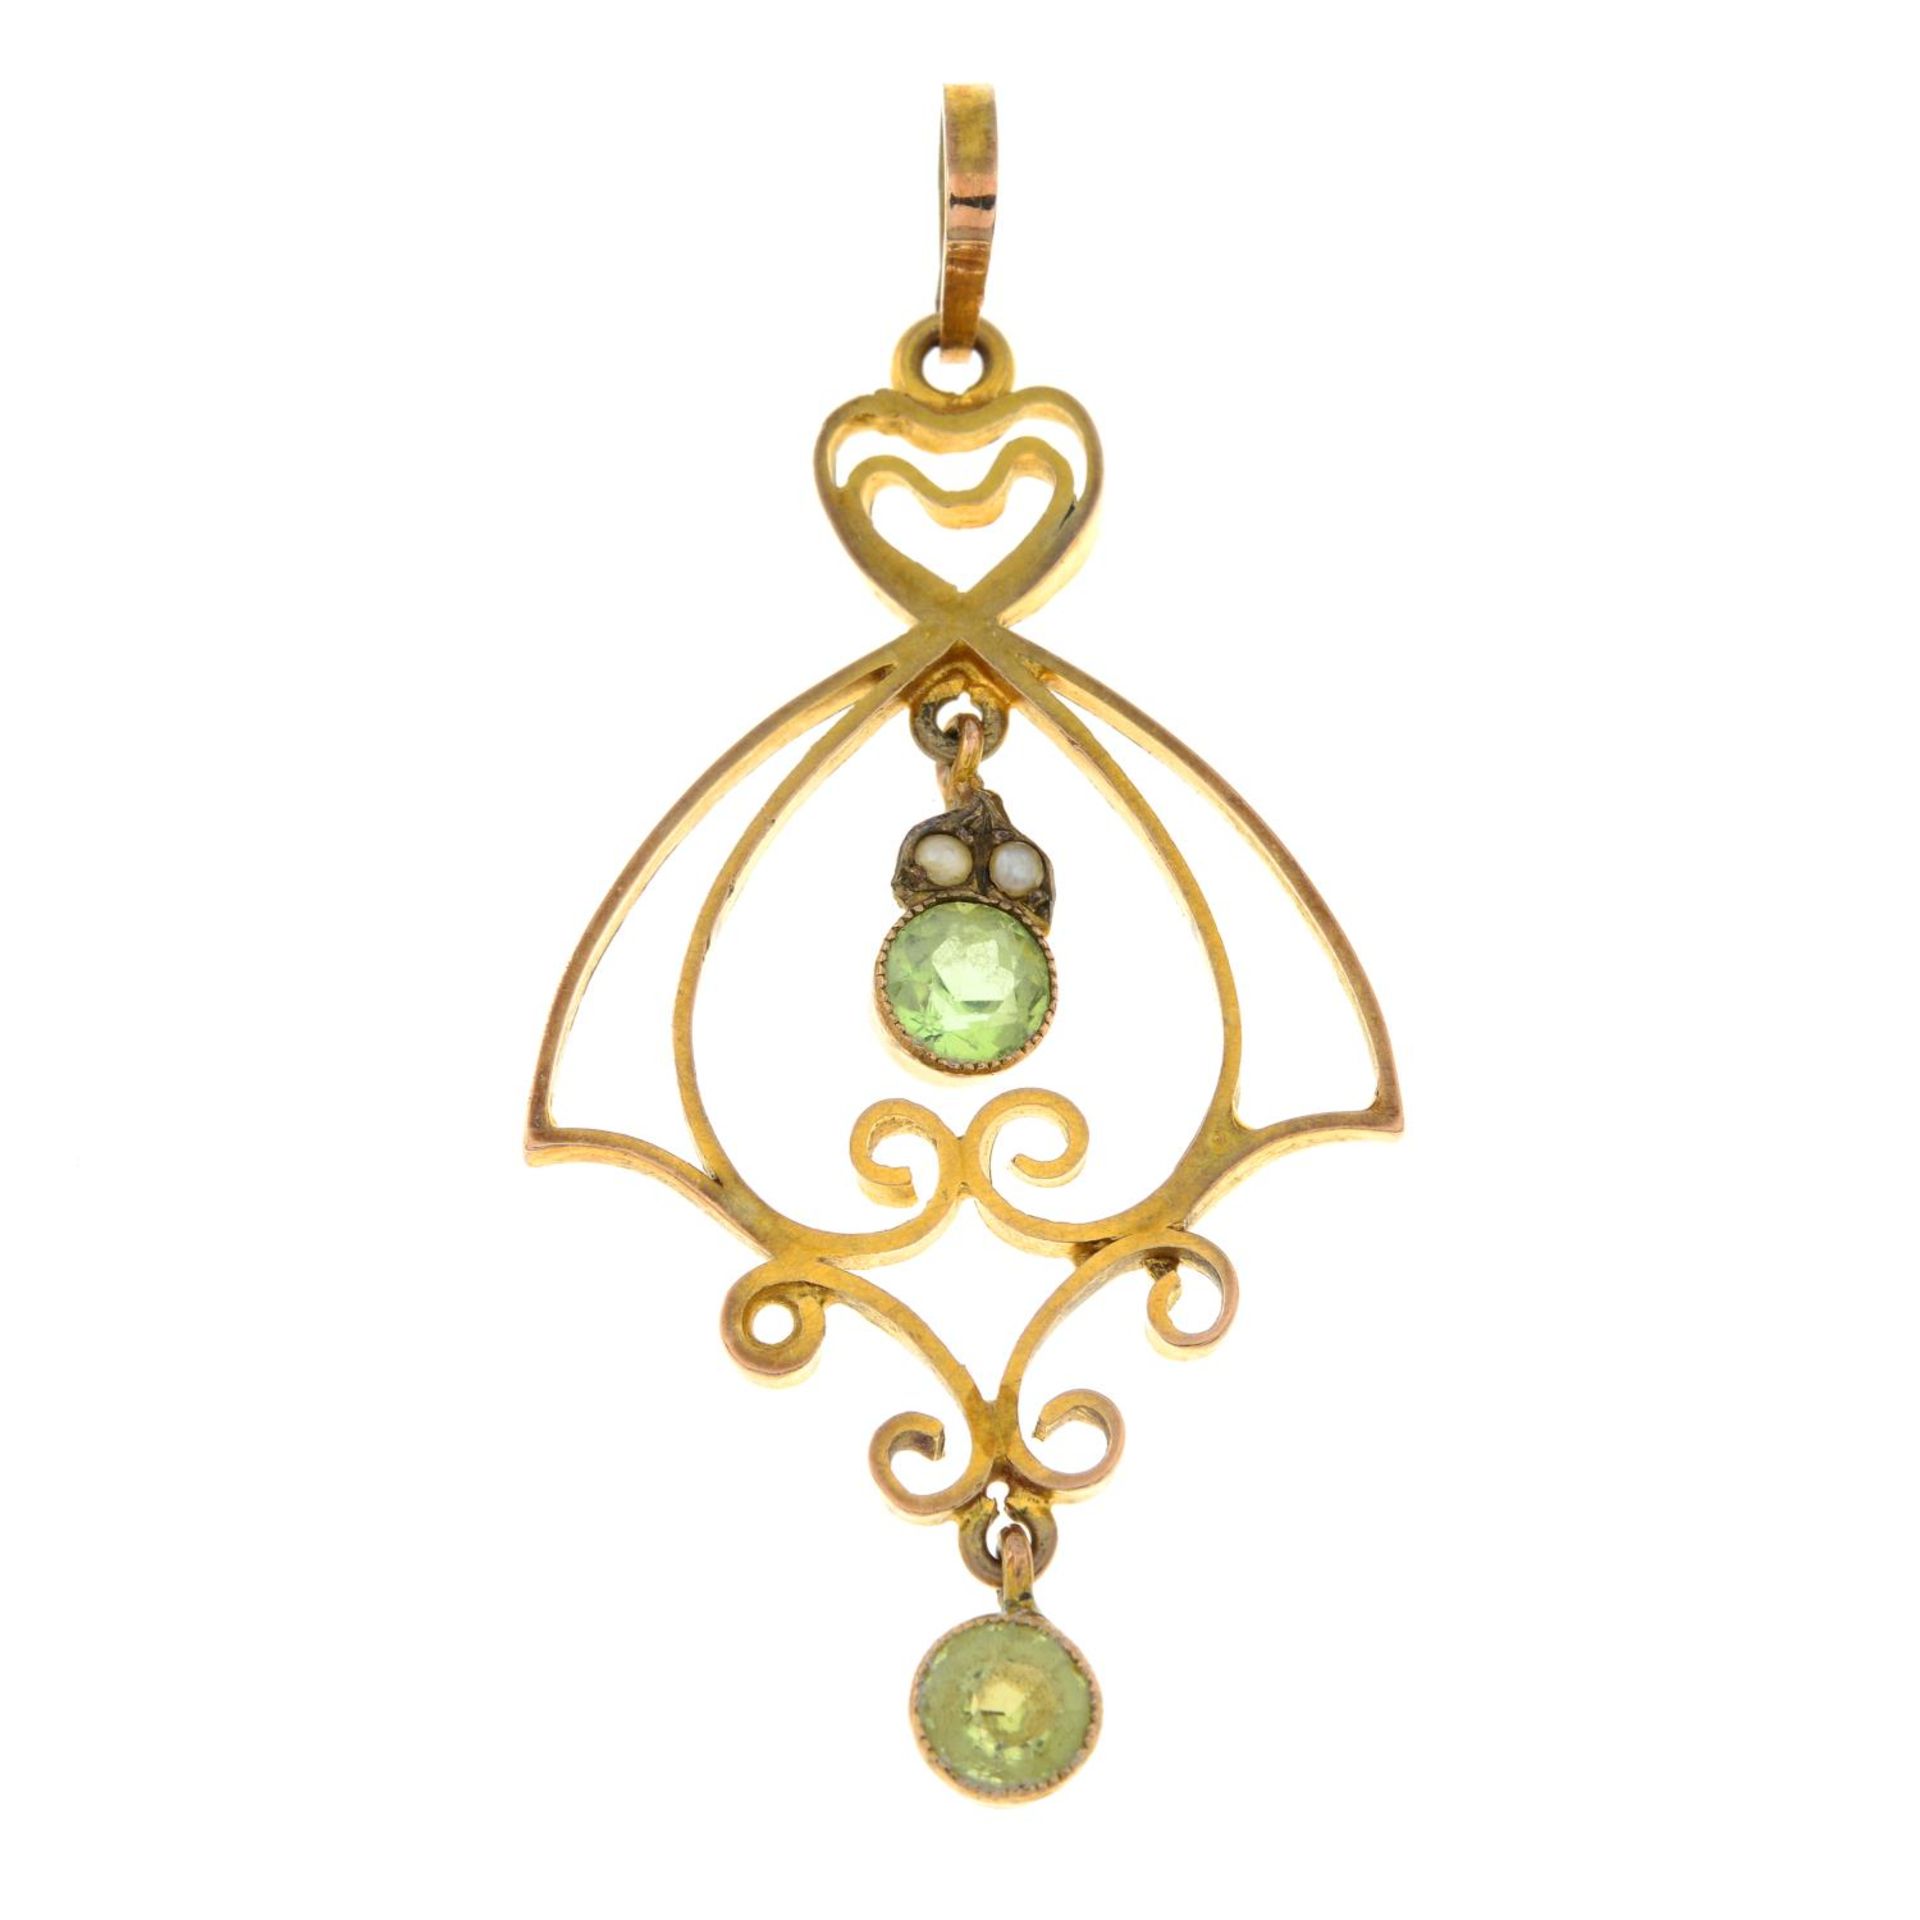 An early 20th century 9ct gold peridot,